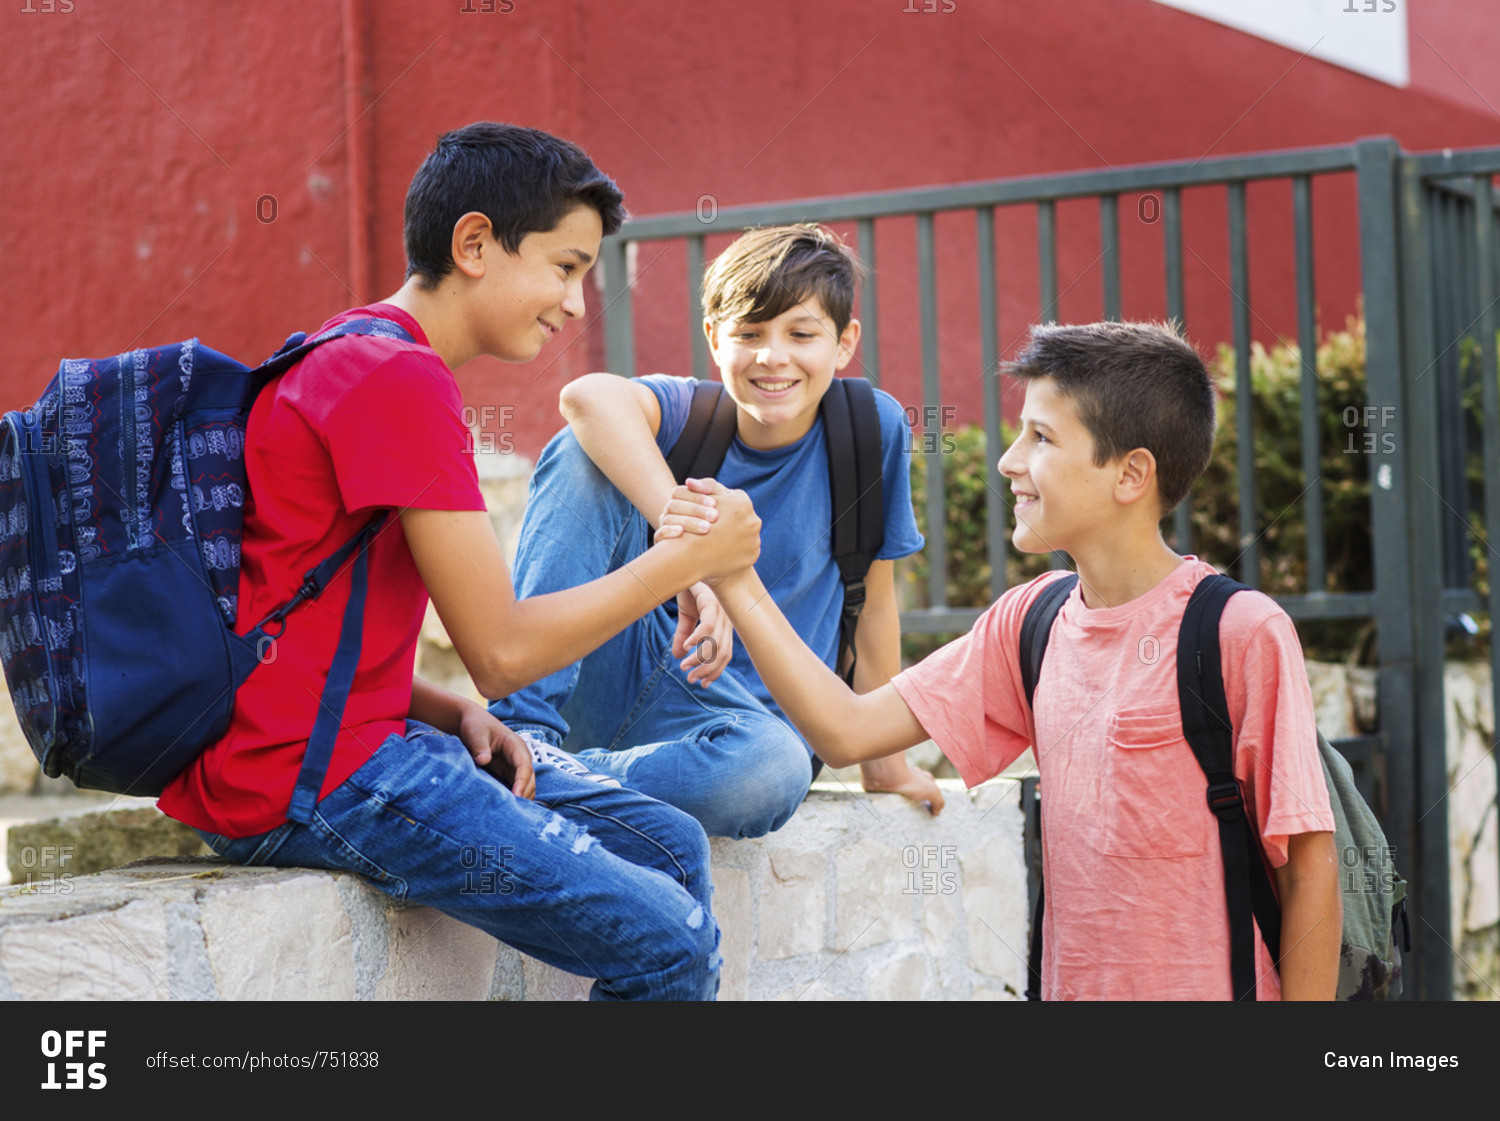 Smiling boy looking at friends giving handshake while sitting on retaining wall against school building